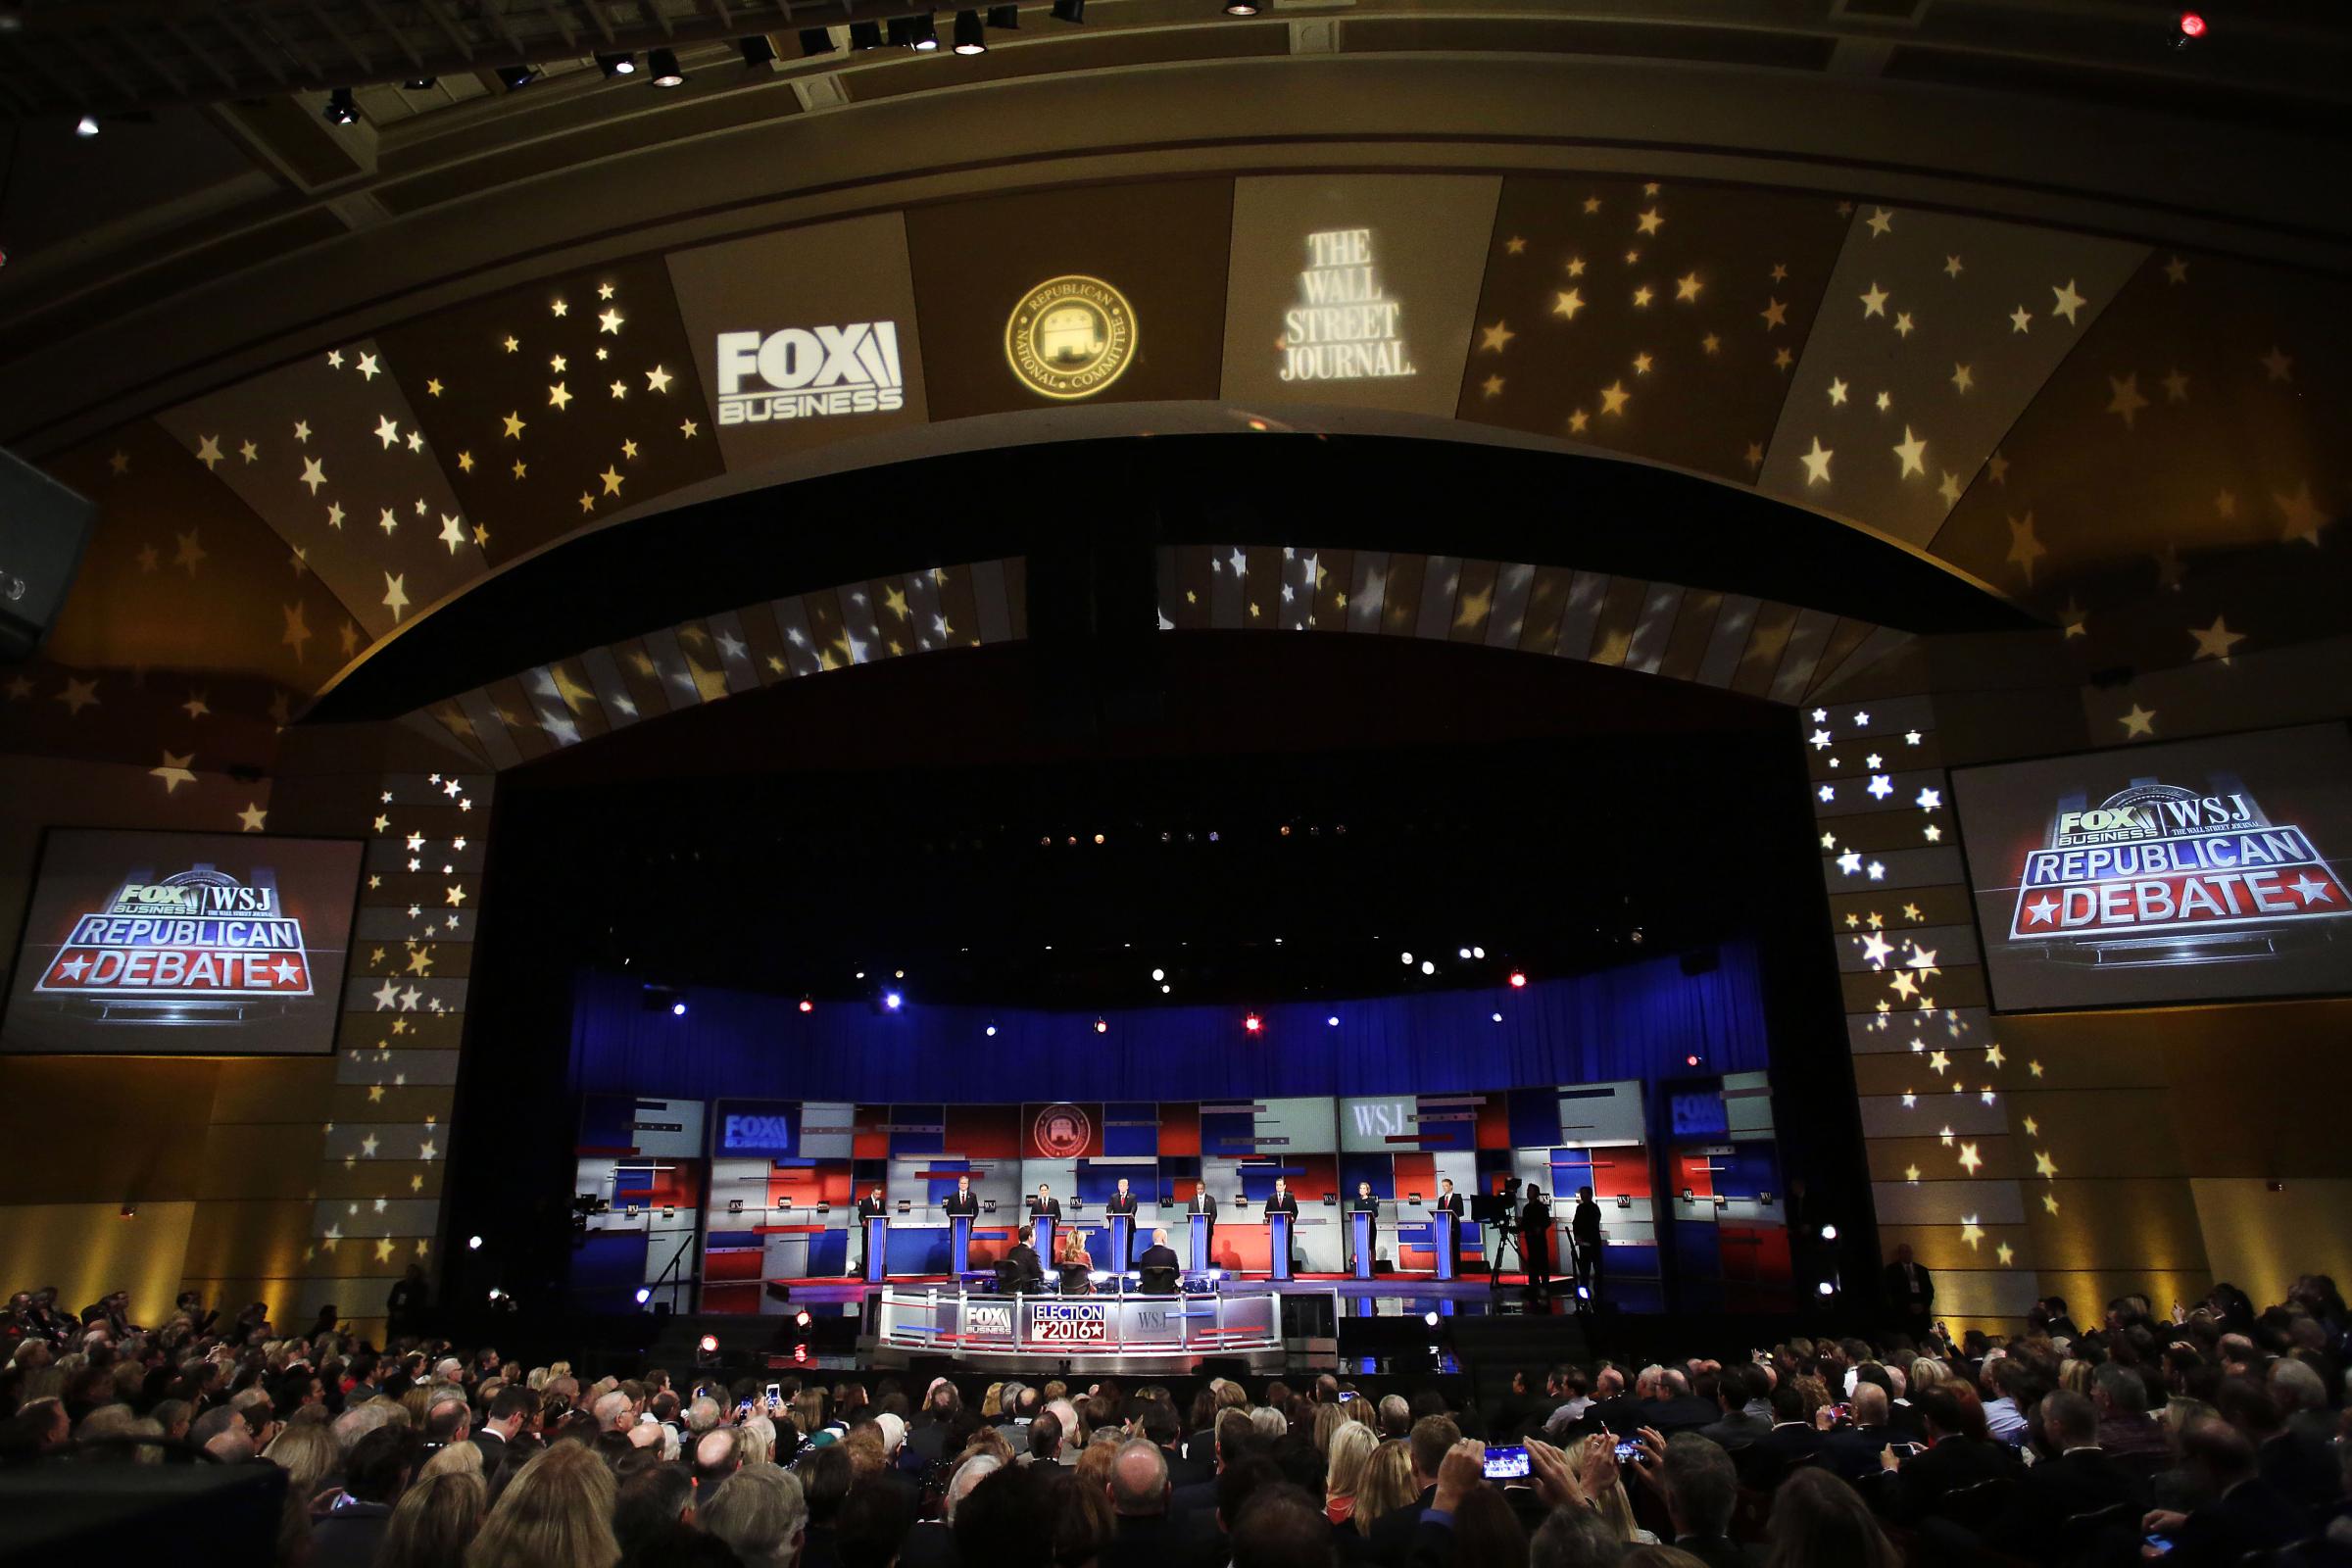 The stage during the Republican Presidential Debate hosted by Fox Business and The Wall Street Journal on Nov. 10, 2015 in Milwaukee.